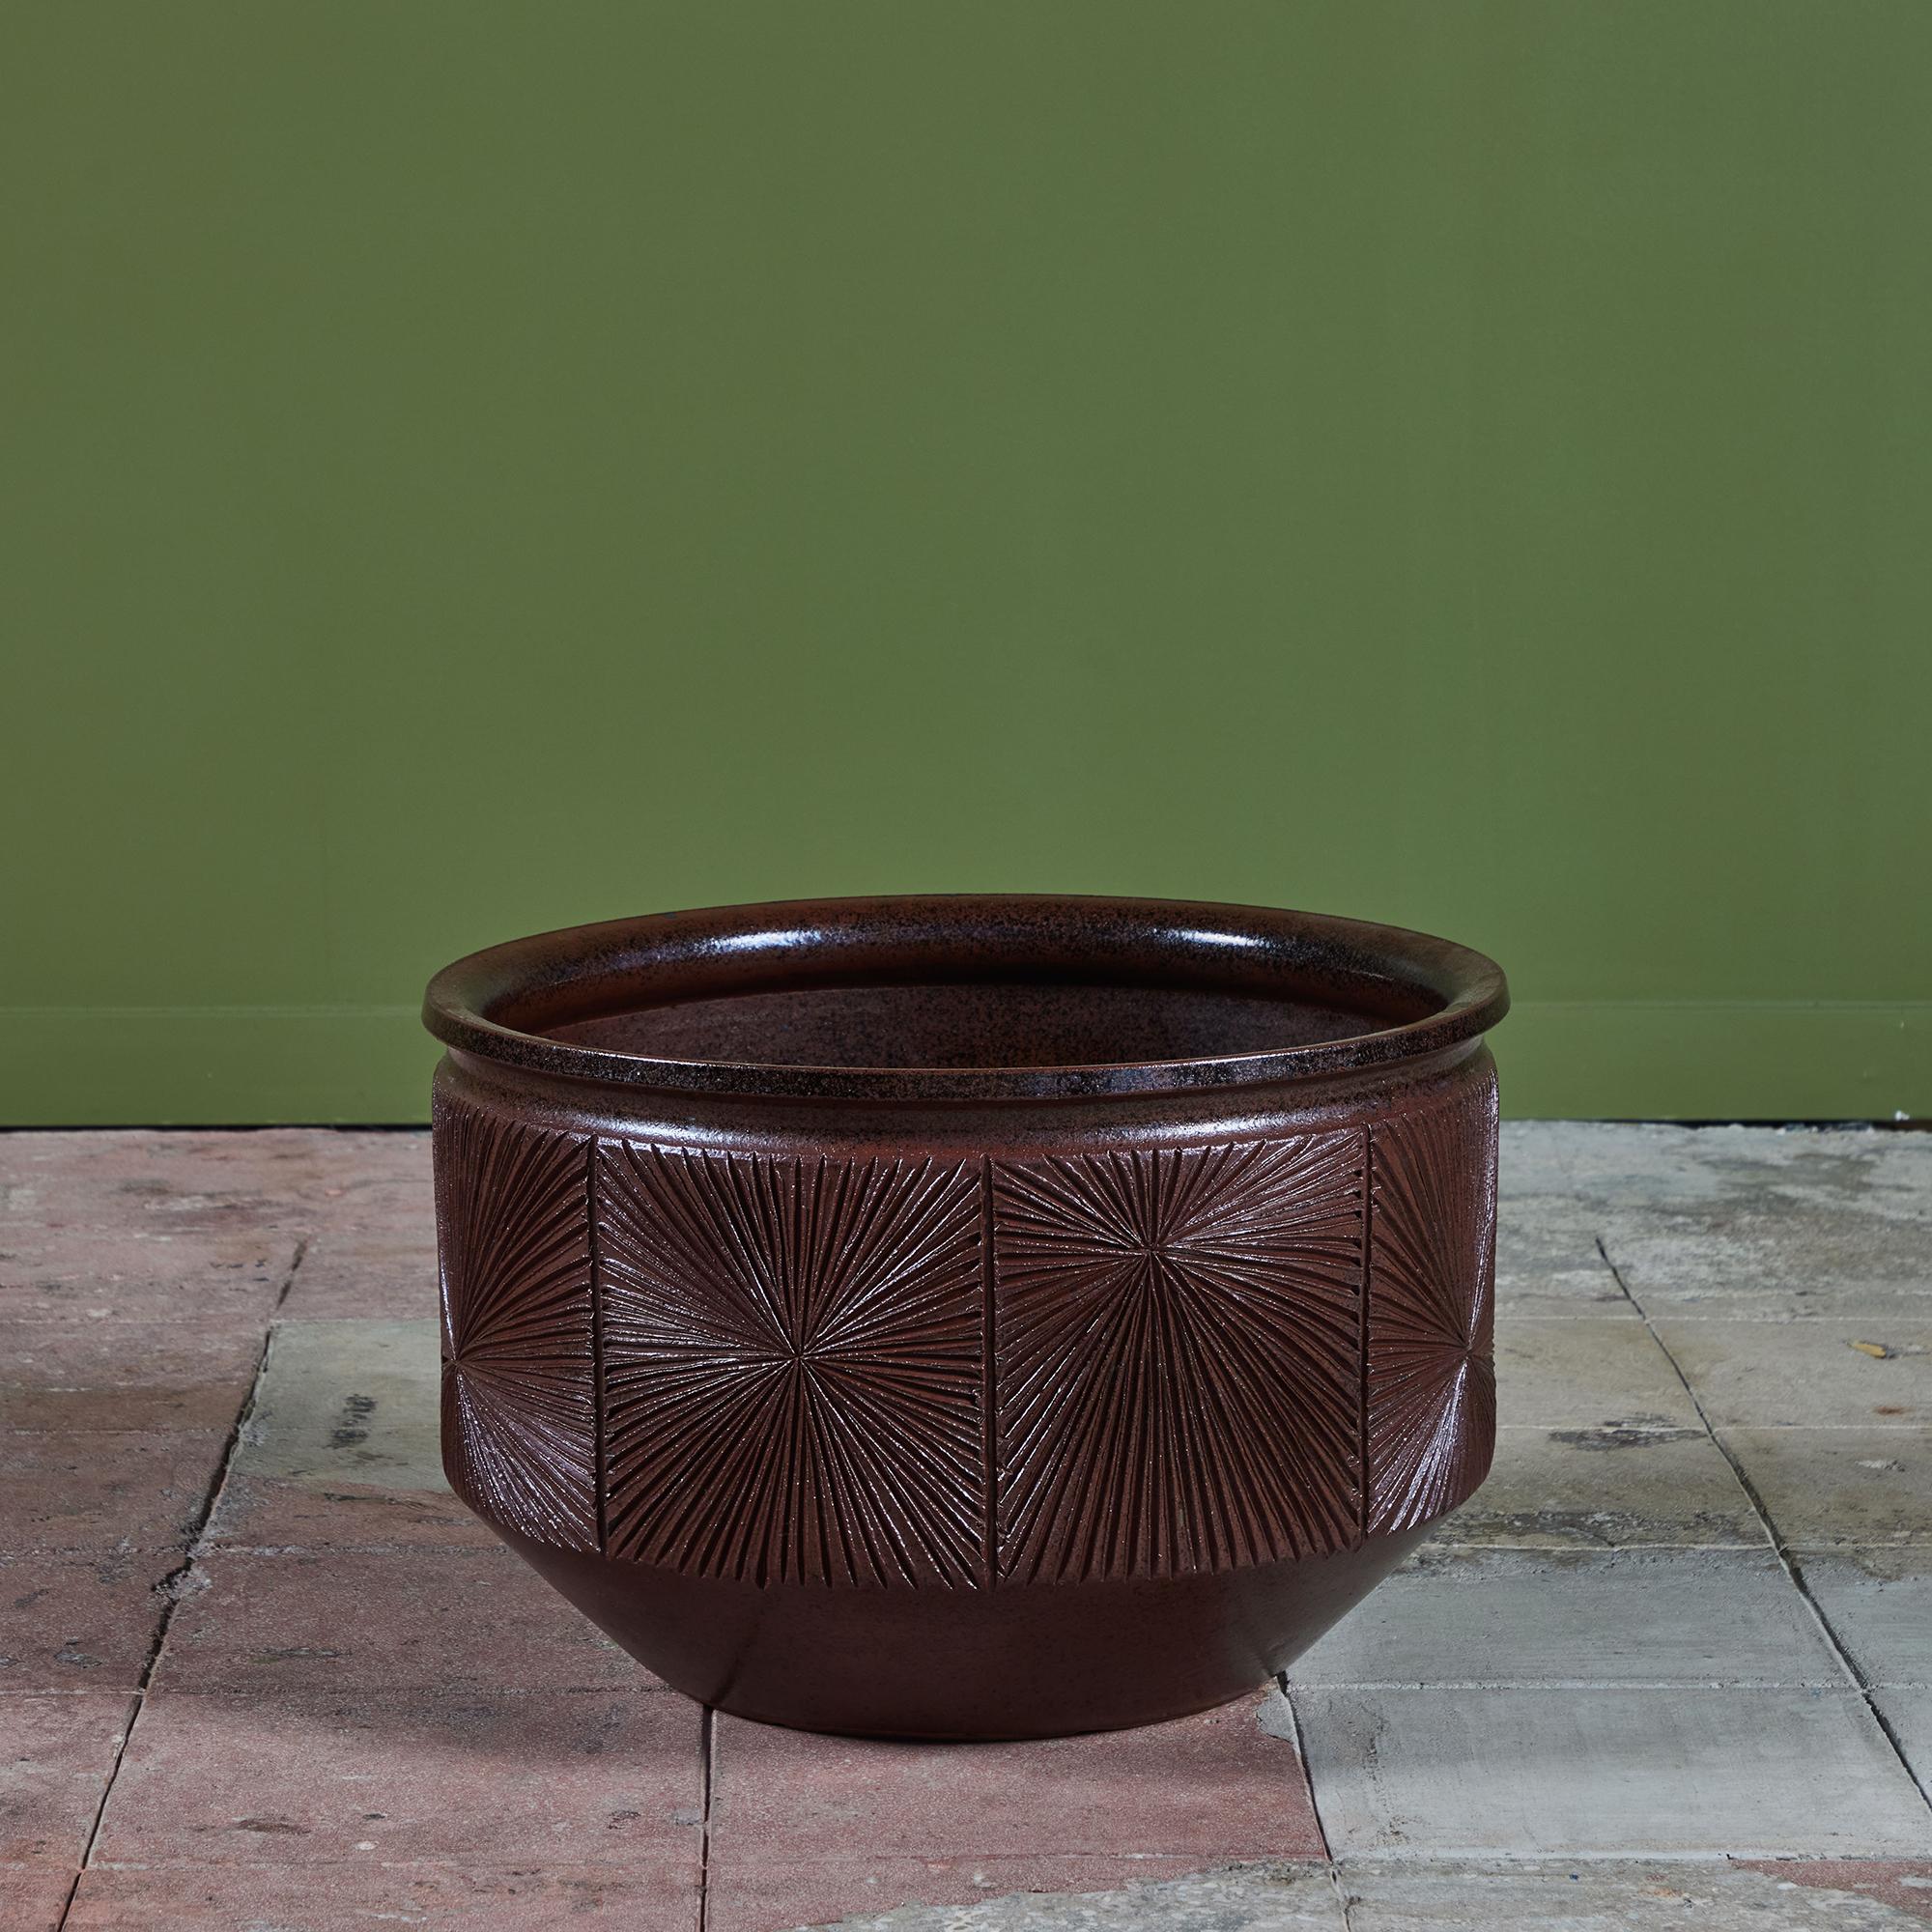 Bowl planter from Earthgender, David Cressey and Robert Maxwell’s early 1970s project. This 23” diameter example is incised in the “Sunburst” design of lines radiating from a central point. The planter has an allover rich plum speckle